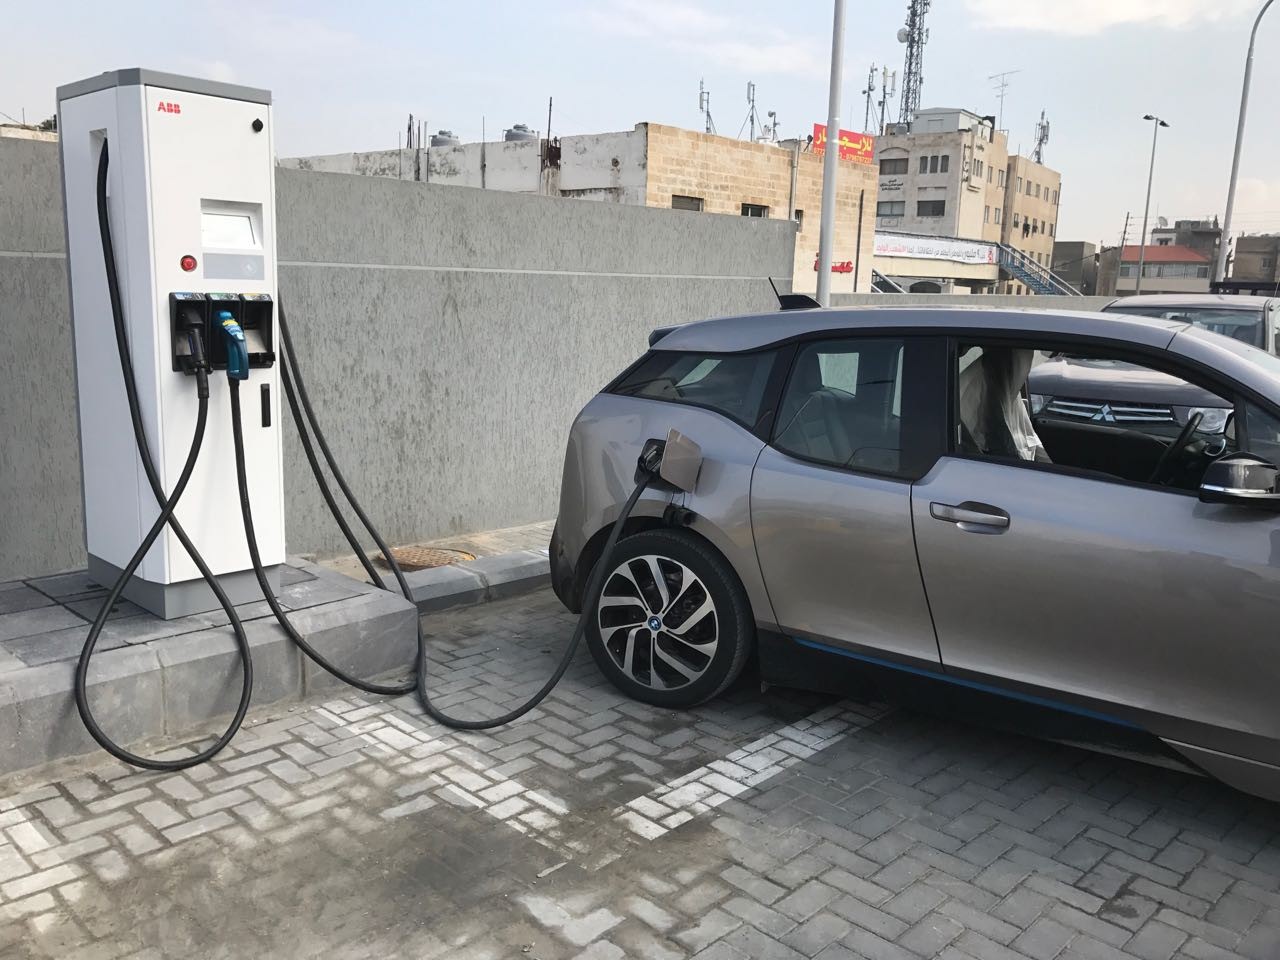 Manaseer Oil & Gas installed 2nd fast electric vehicle cars charger for the public use